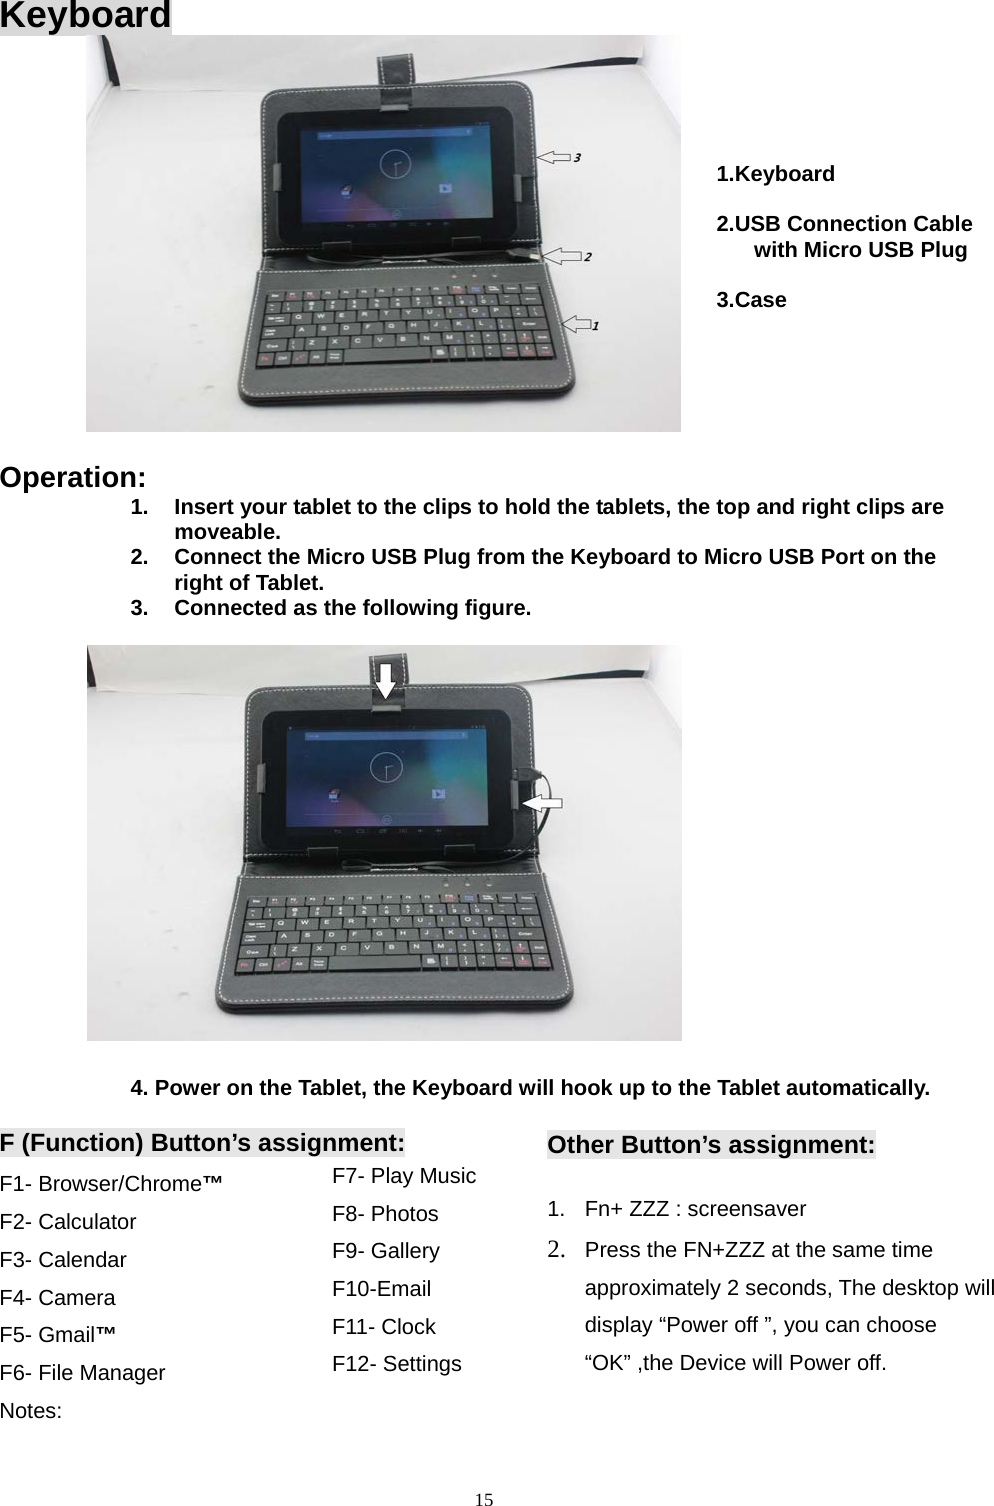   Keyboard           Operation: 1. Insert your tablet to the clips to hold the tablets, the top and right clips are moveable. 2. Connect the Micro USB Plug from the Keyboard to Micro USB Port on the right of Tablet. 3. Connected as the following figure.           4. Power on the Tablet, the Keyboard will hook up to the Tablet automatically.  F (Function) Button’s assignment: F1- Browser/Chrome™ F2- Calculator F3- Calendar F4- Camera F5- Gmail™ F6- File Manager Notes: F7- Play Music F8- Photos F9- Gallery F10-Email F11- Clock F12- Settings  Other Button’s assignment:  1. Fn+ ZZZ : screensaver 2. Press the FN+ZZZ at the same time approximately 2 seconds, The desktop will display “Power off ”, you can choose “OK” ,the Device will Power off.  1.Keyboard  2.USB Connection Cable with Micro USB Plug  3.Case   15  